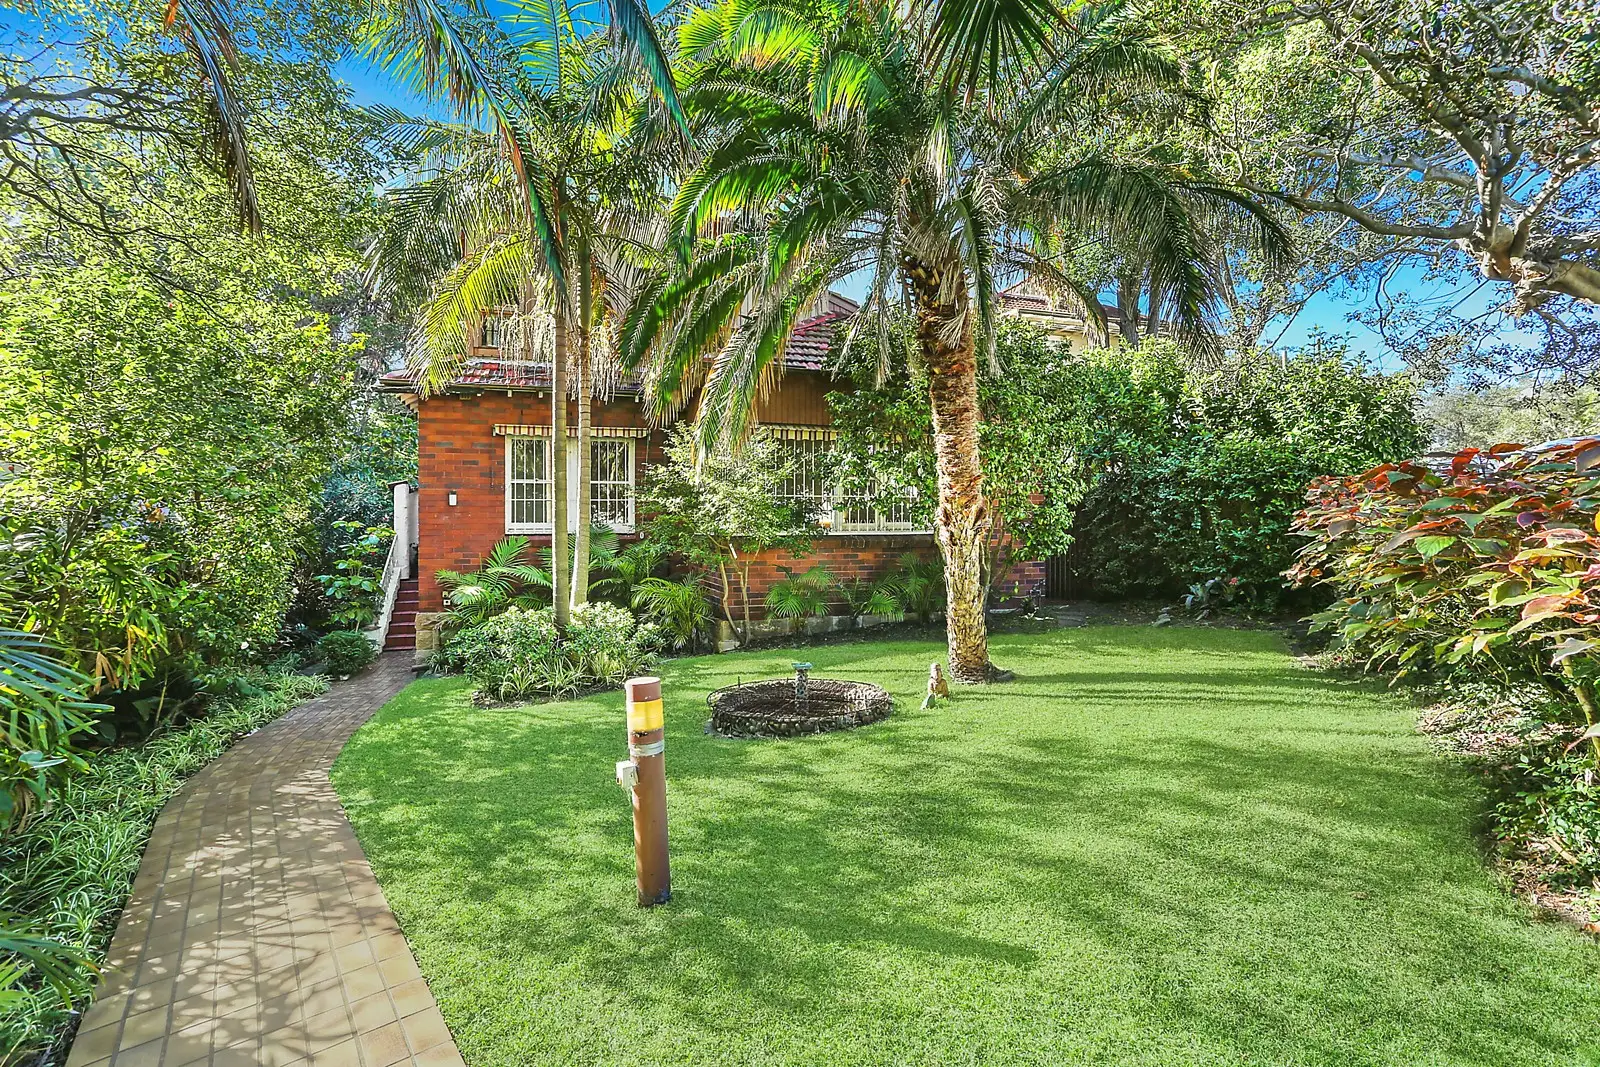 Photo #1: 6 Russell Street, Vaucluse - Sold by Sydney Sotheby's International Realty